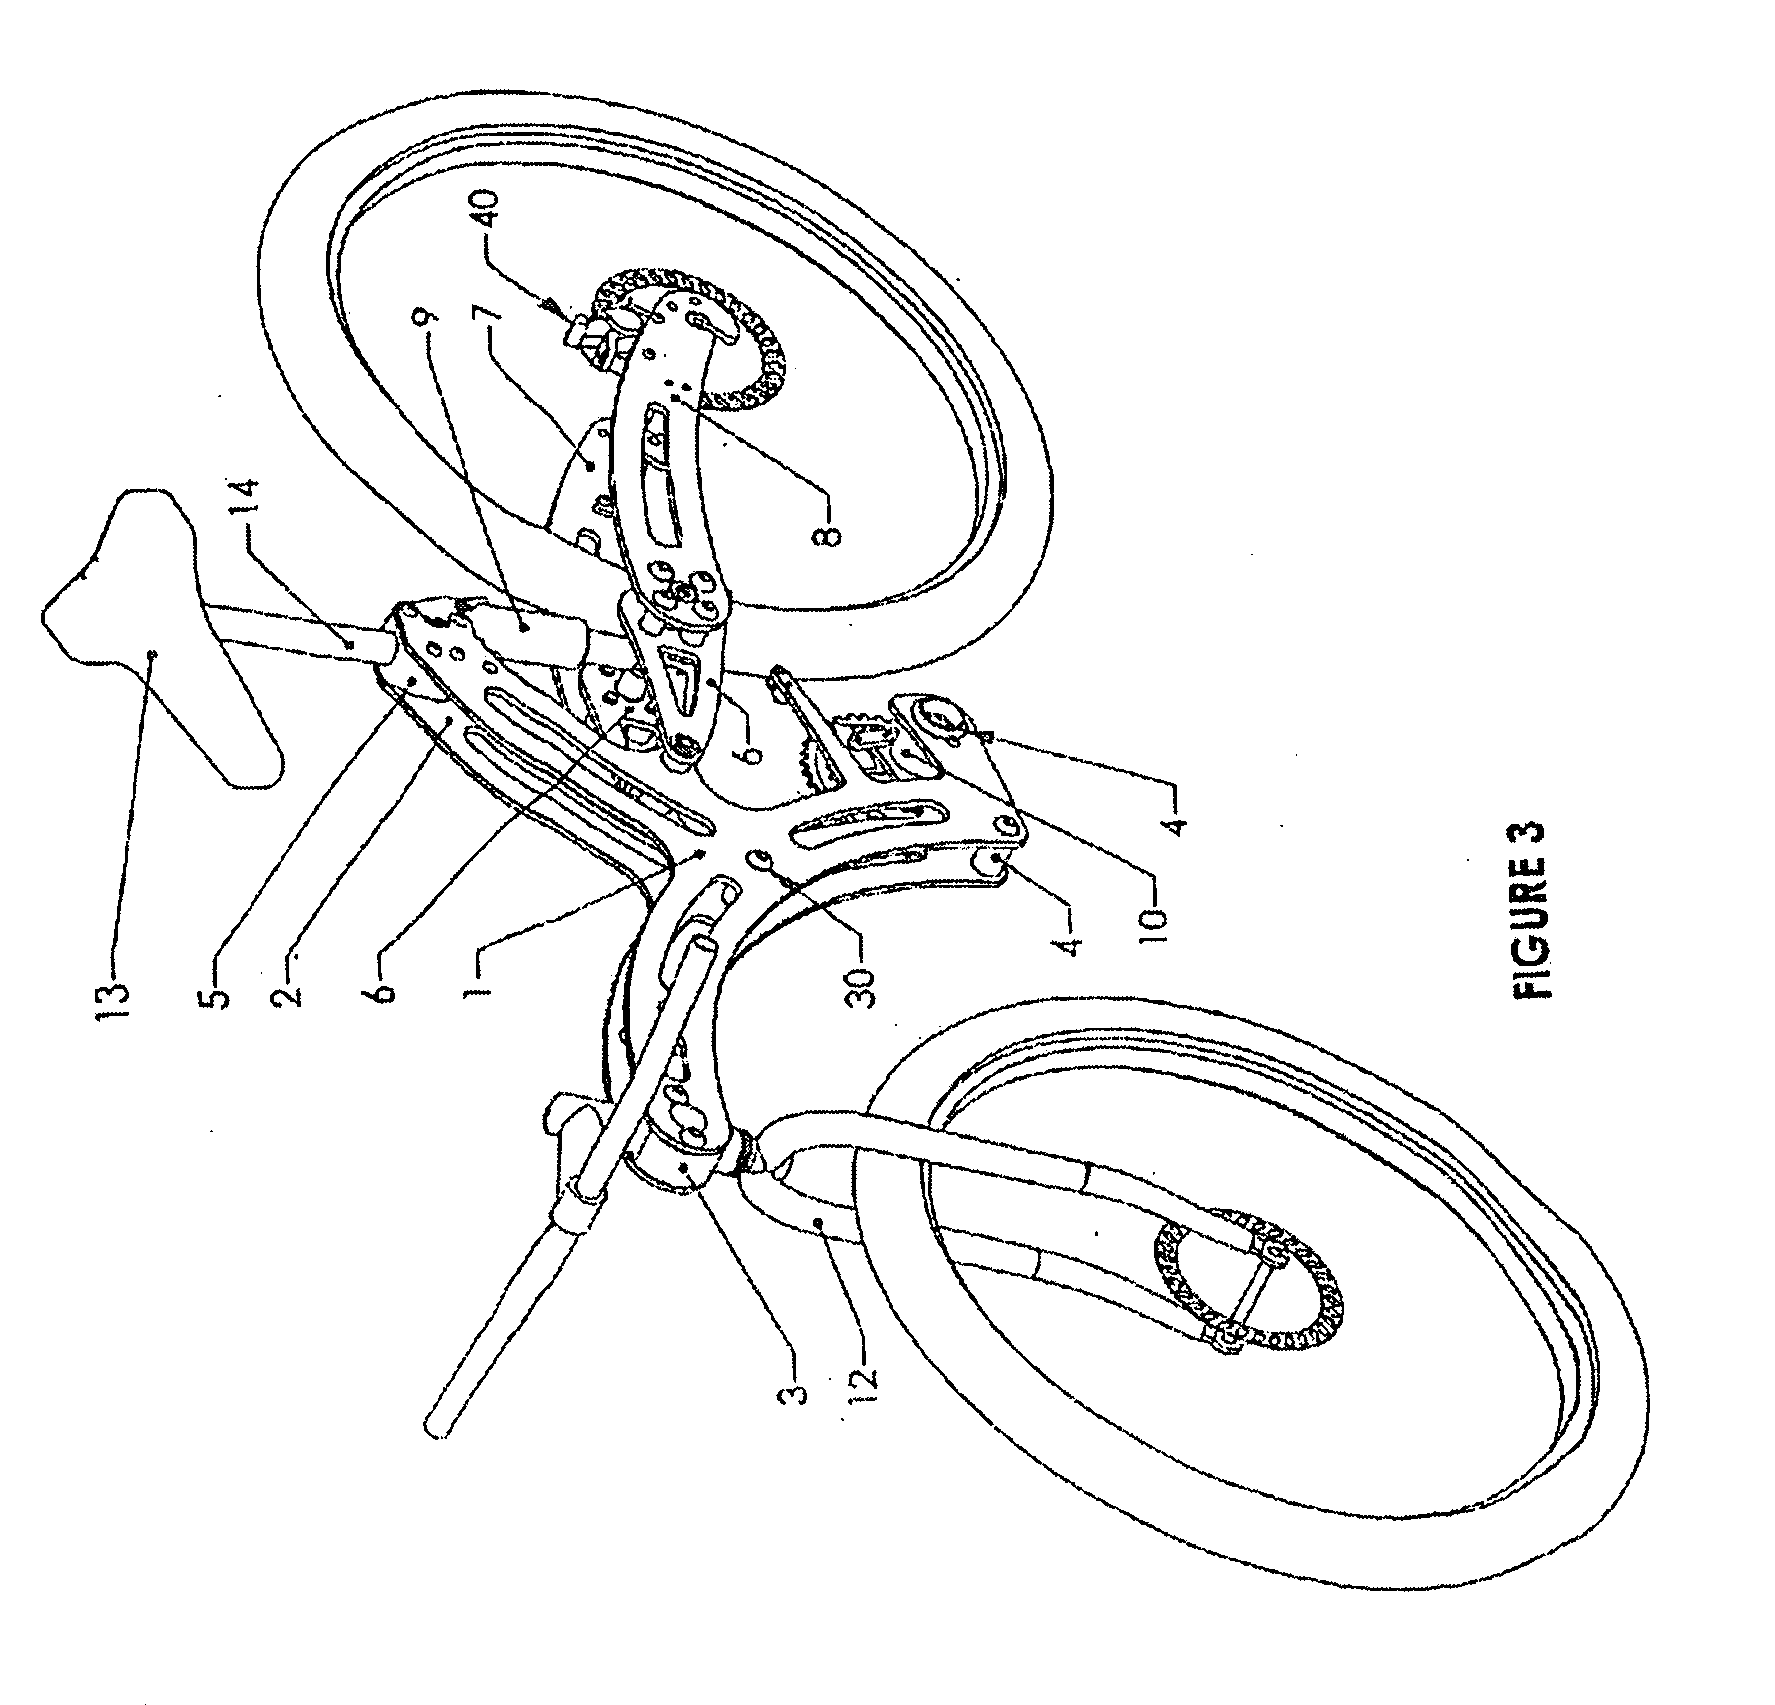 Folding Bicycle Constructed from Plate Frame Elements